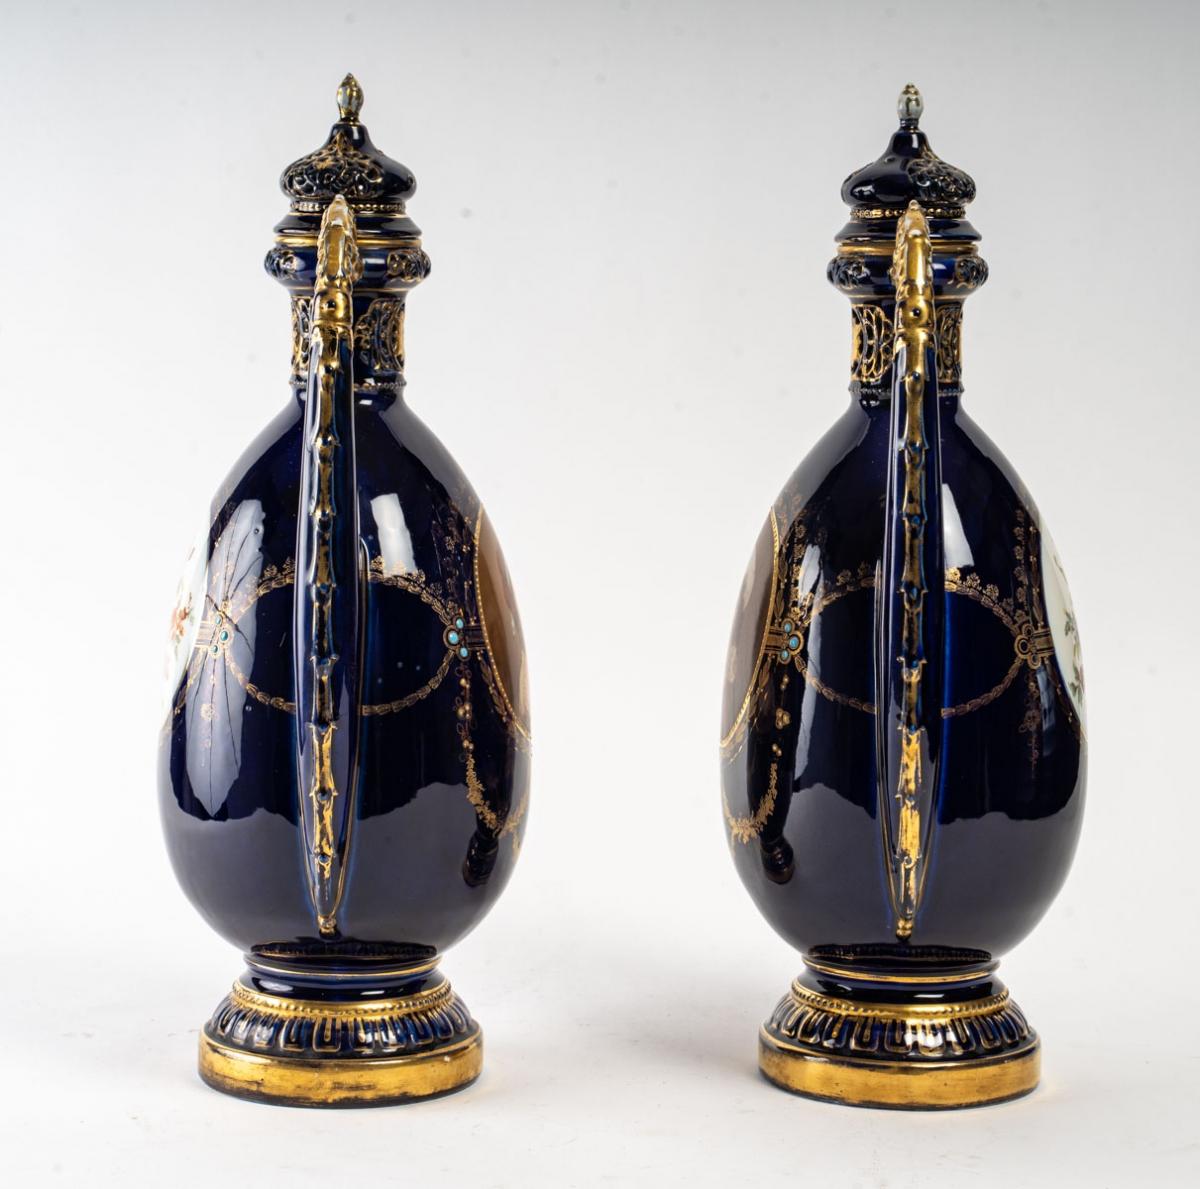 Pair of Vienna porcelain vases
Orientalist style, of high quality with a golden décor and an elegant portrait of a
From the Napoleon III period.
Measures: Height 40 cm, width at the handles 20 cm.